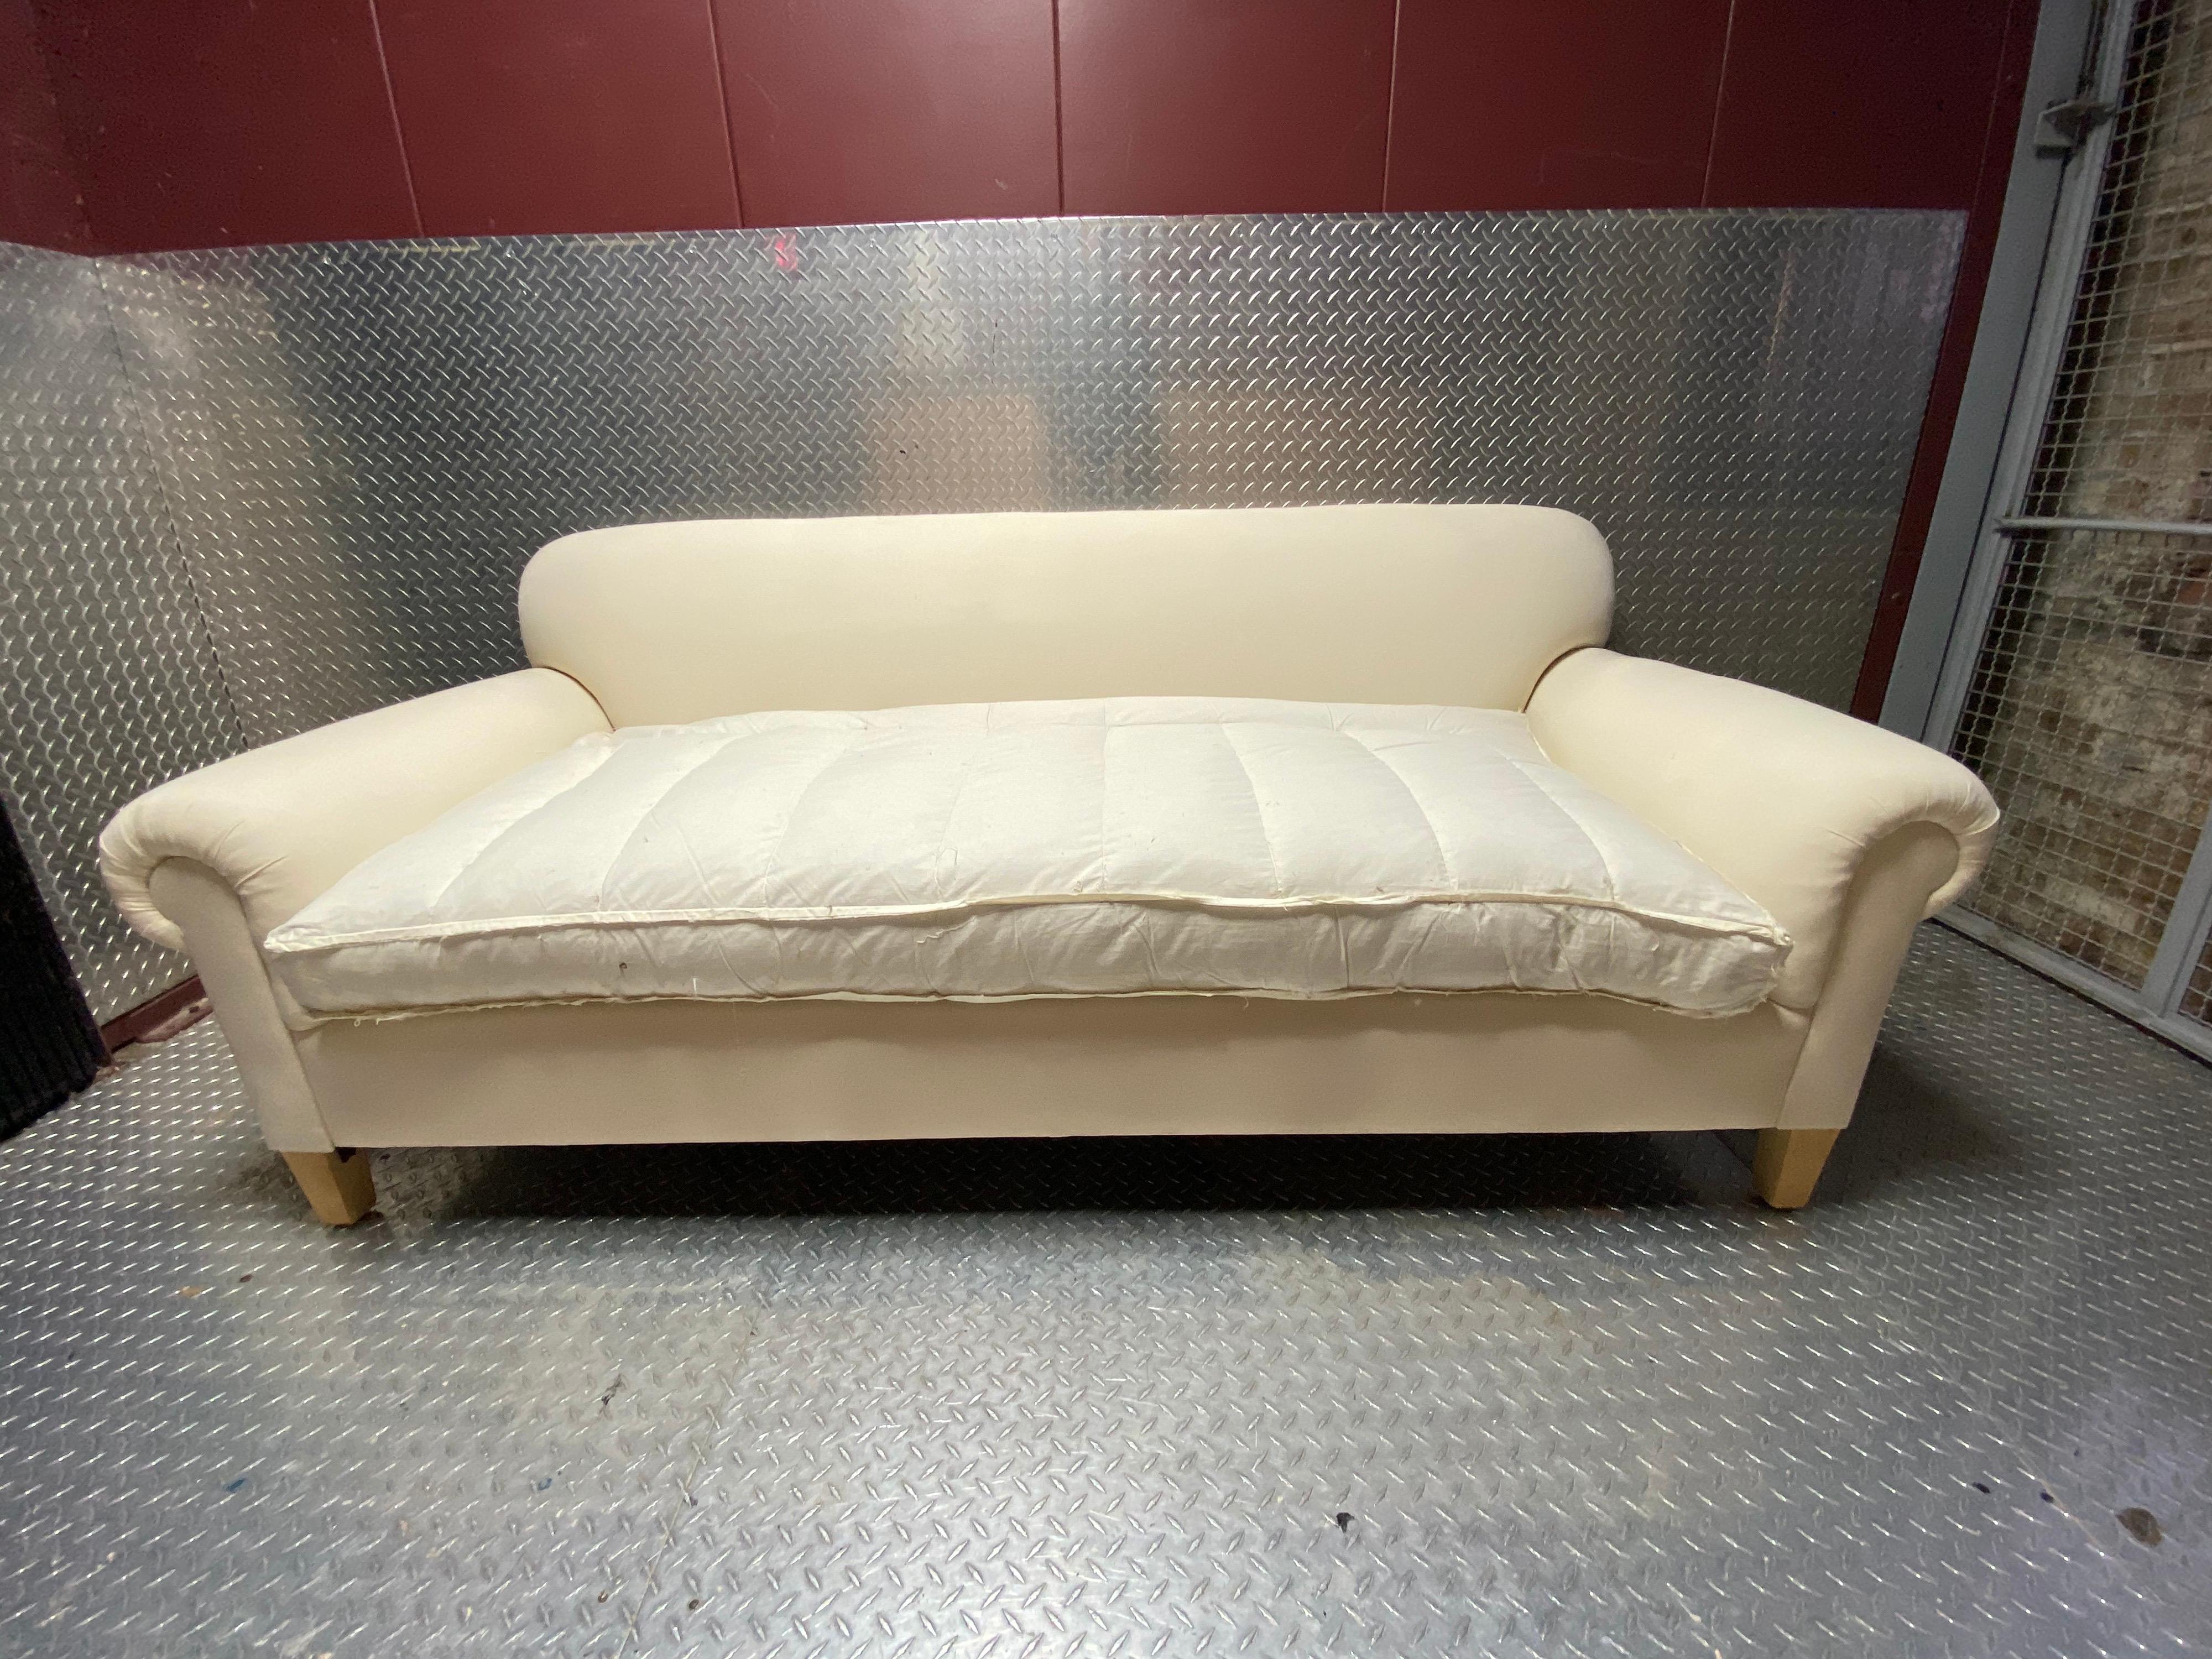 fully restored sofa and upholstered in muslin. 8 way-hand tied spring construction, foam core and down wrap seat cushion.